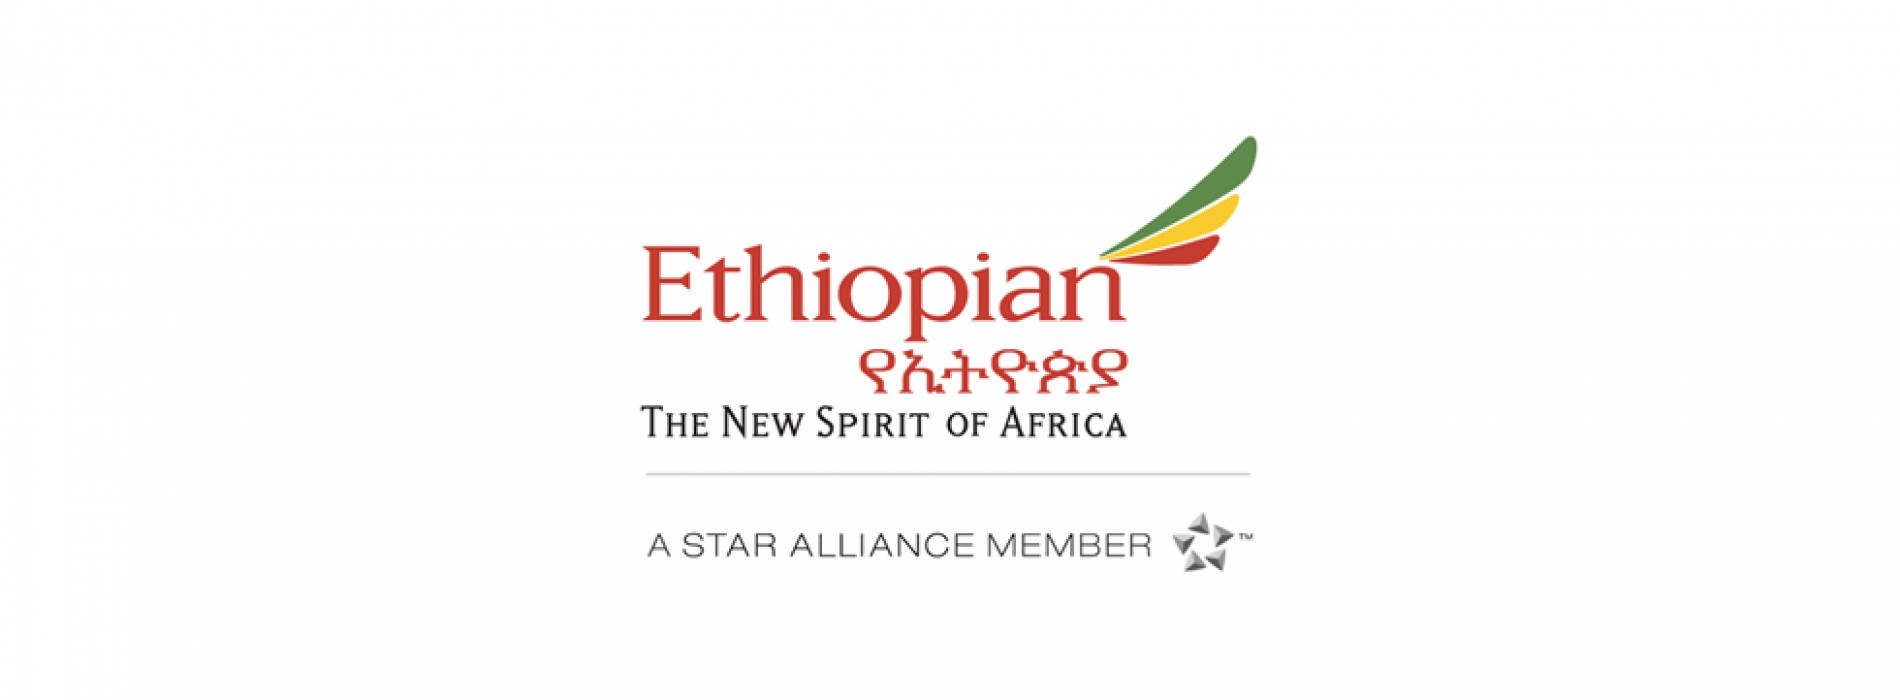 Ethiopian continues its operation in Nigeria